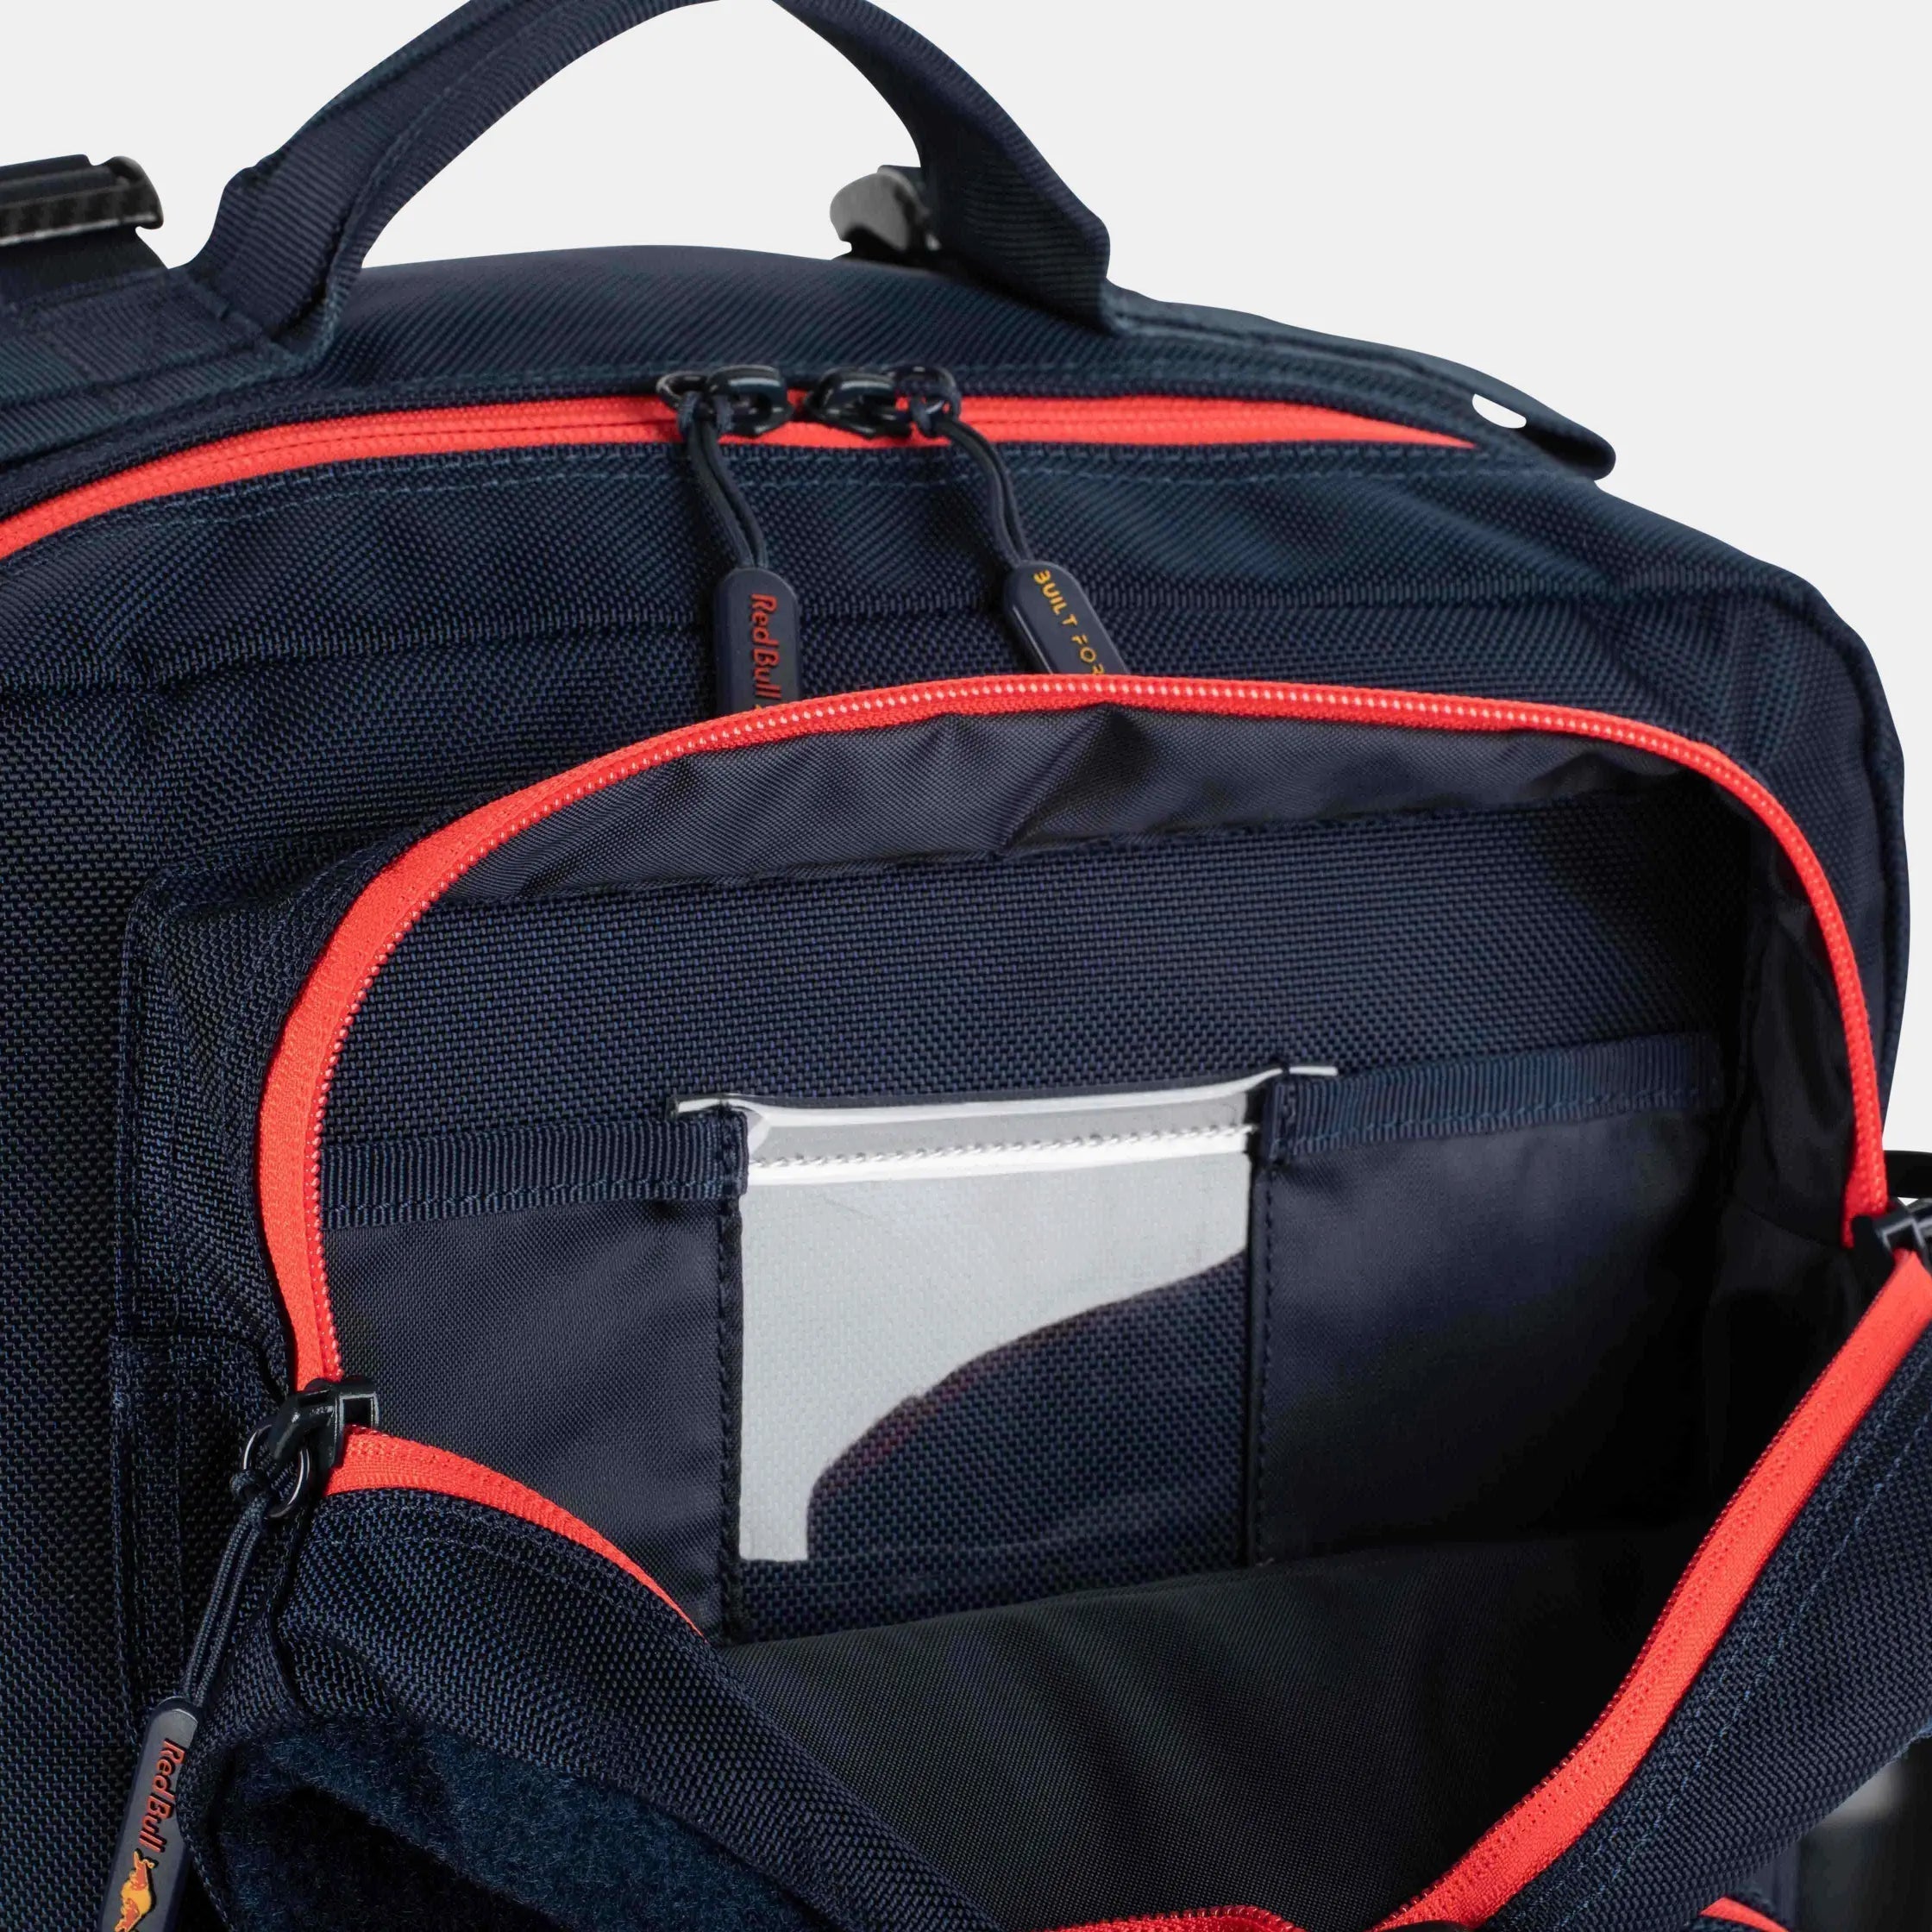 Built For Athletes Backpacks Red Bull Racing 35L Backpack